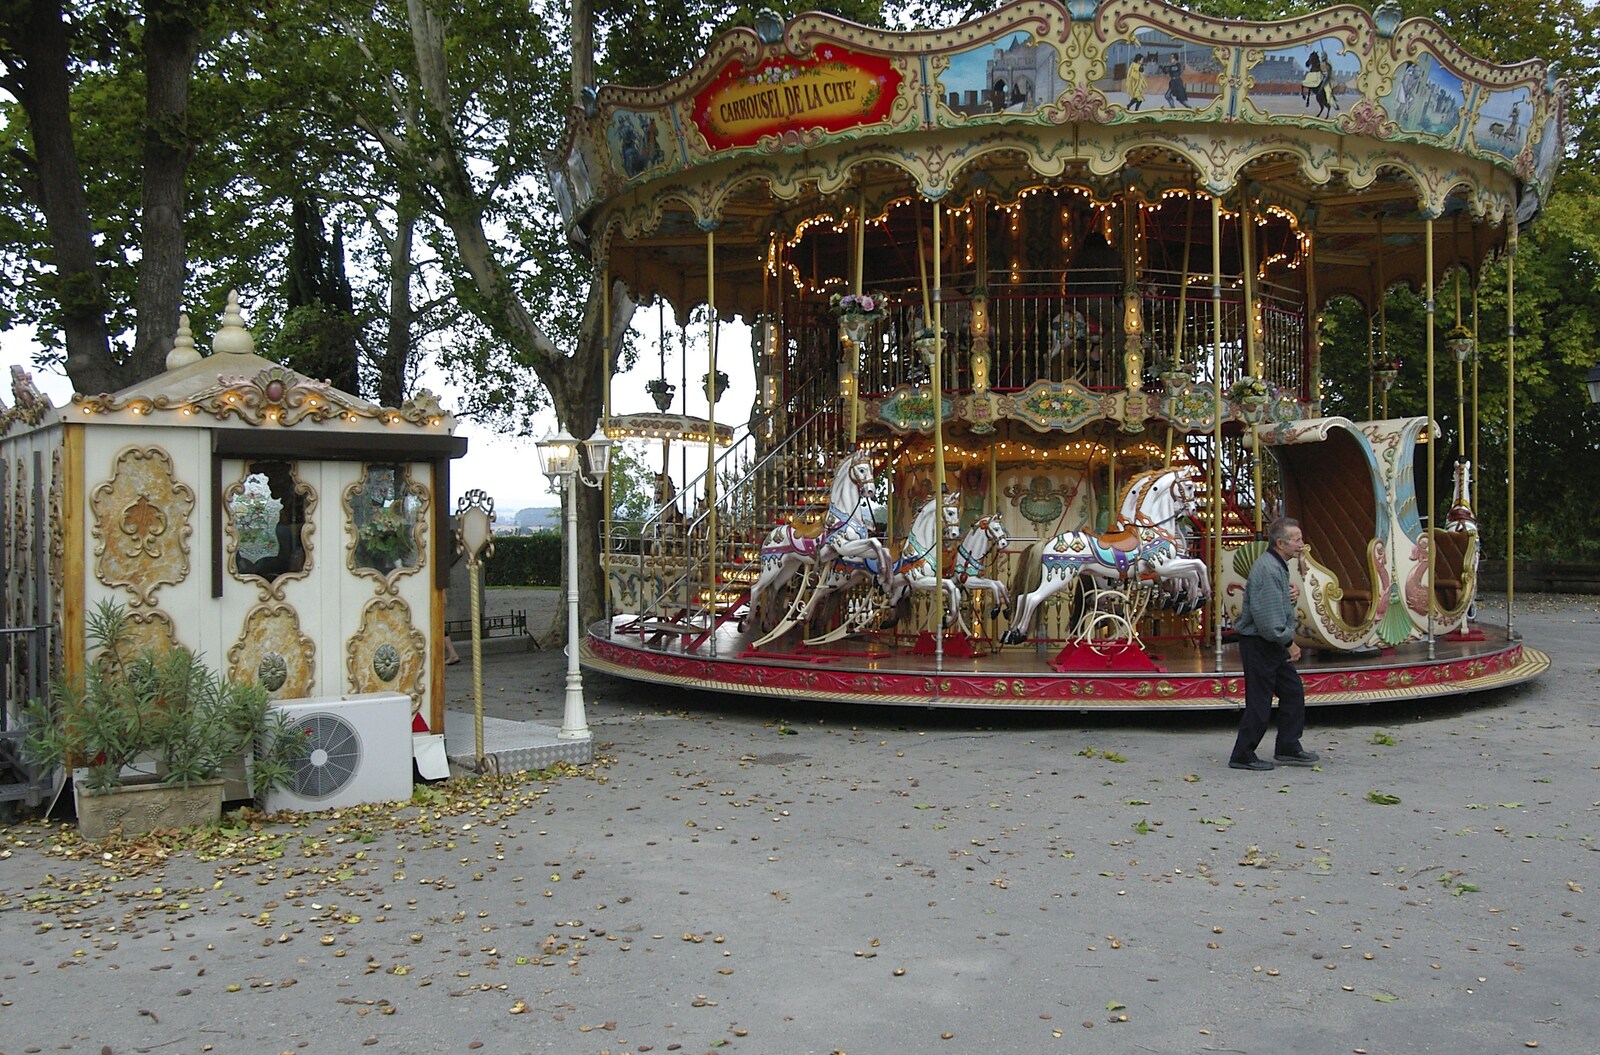 Autumn leaves drift around a carousel from A Couple of Days in Carcassonne, Aude, France - 21st September 2006